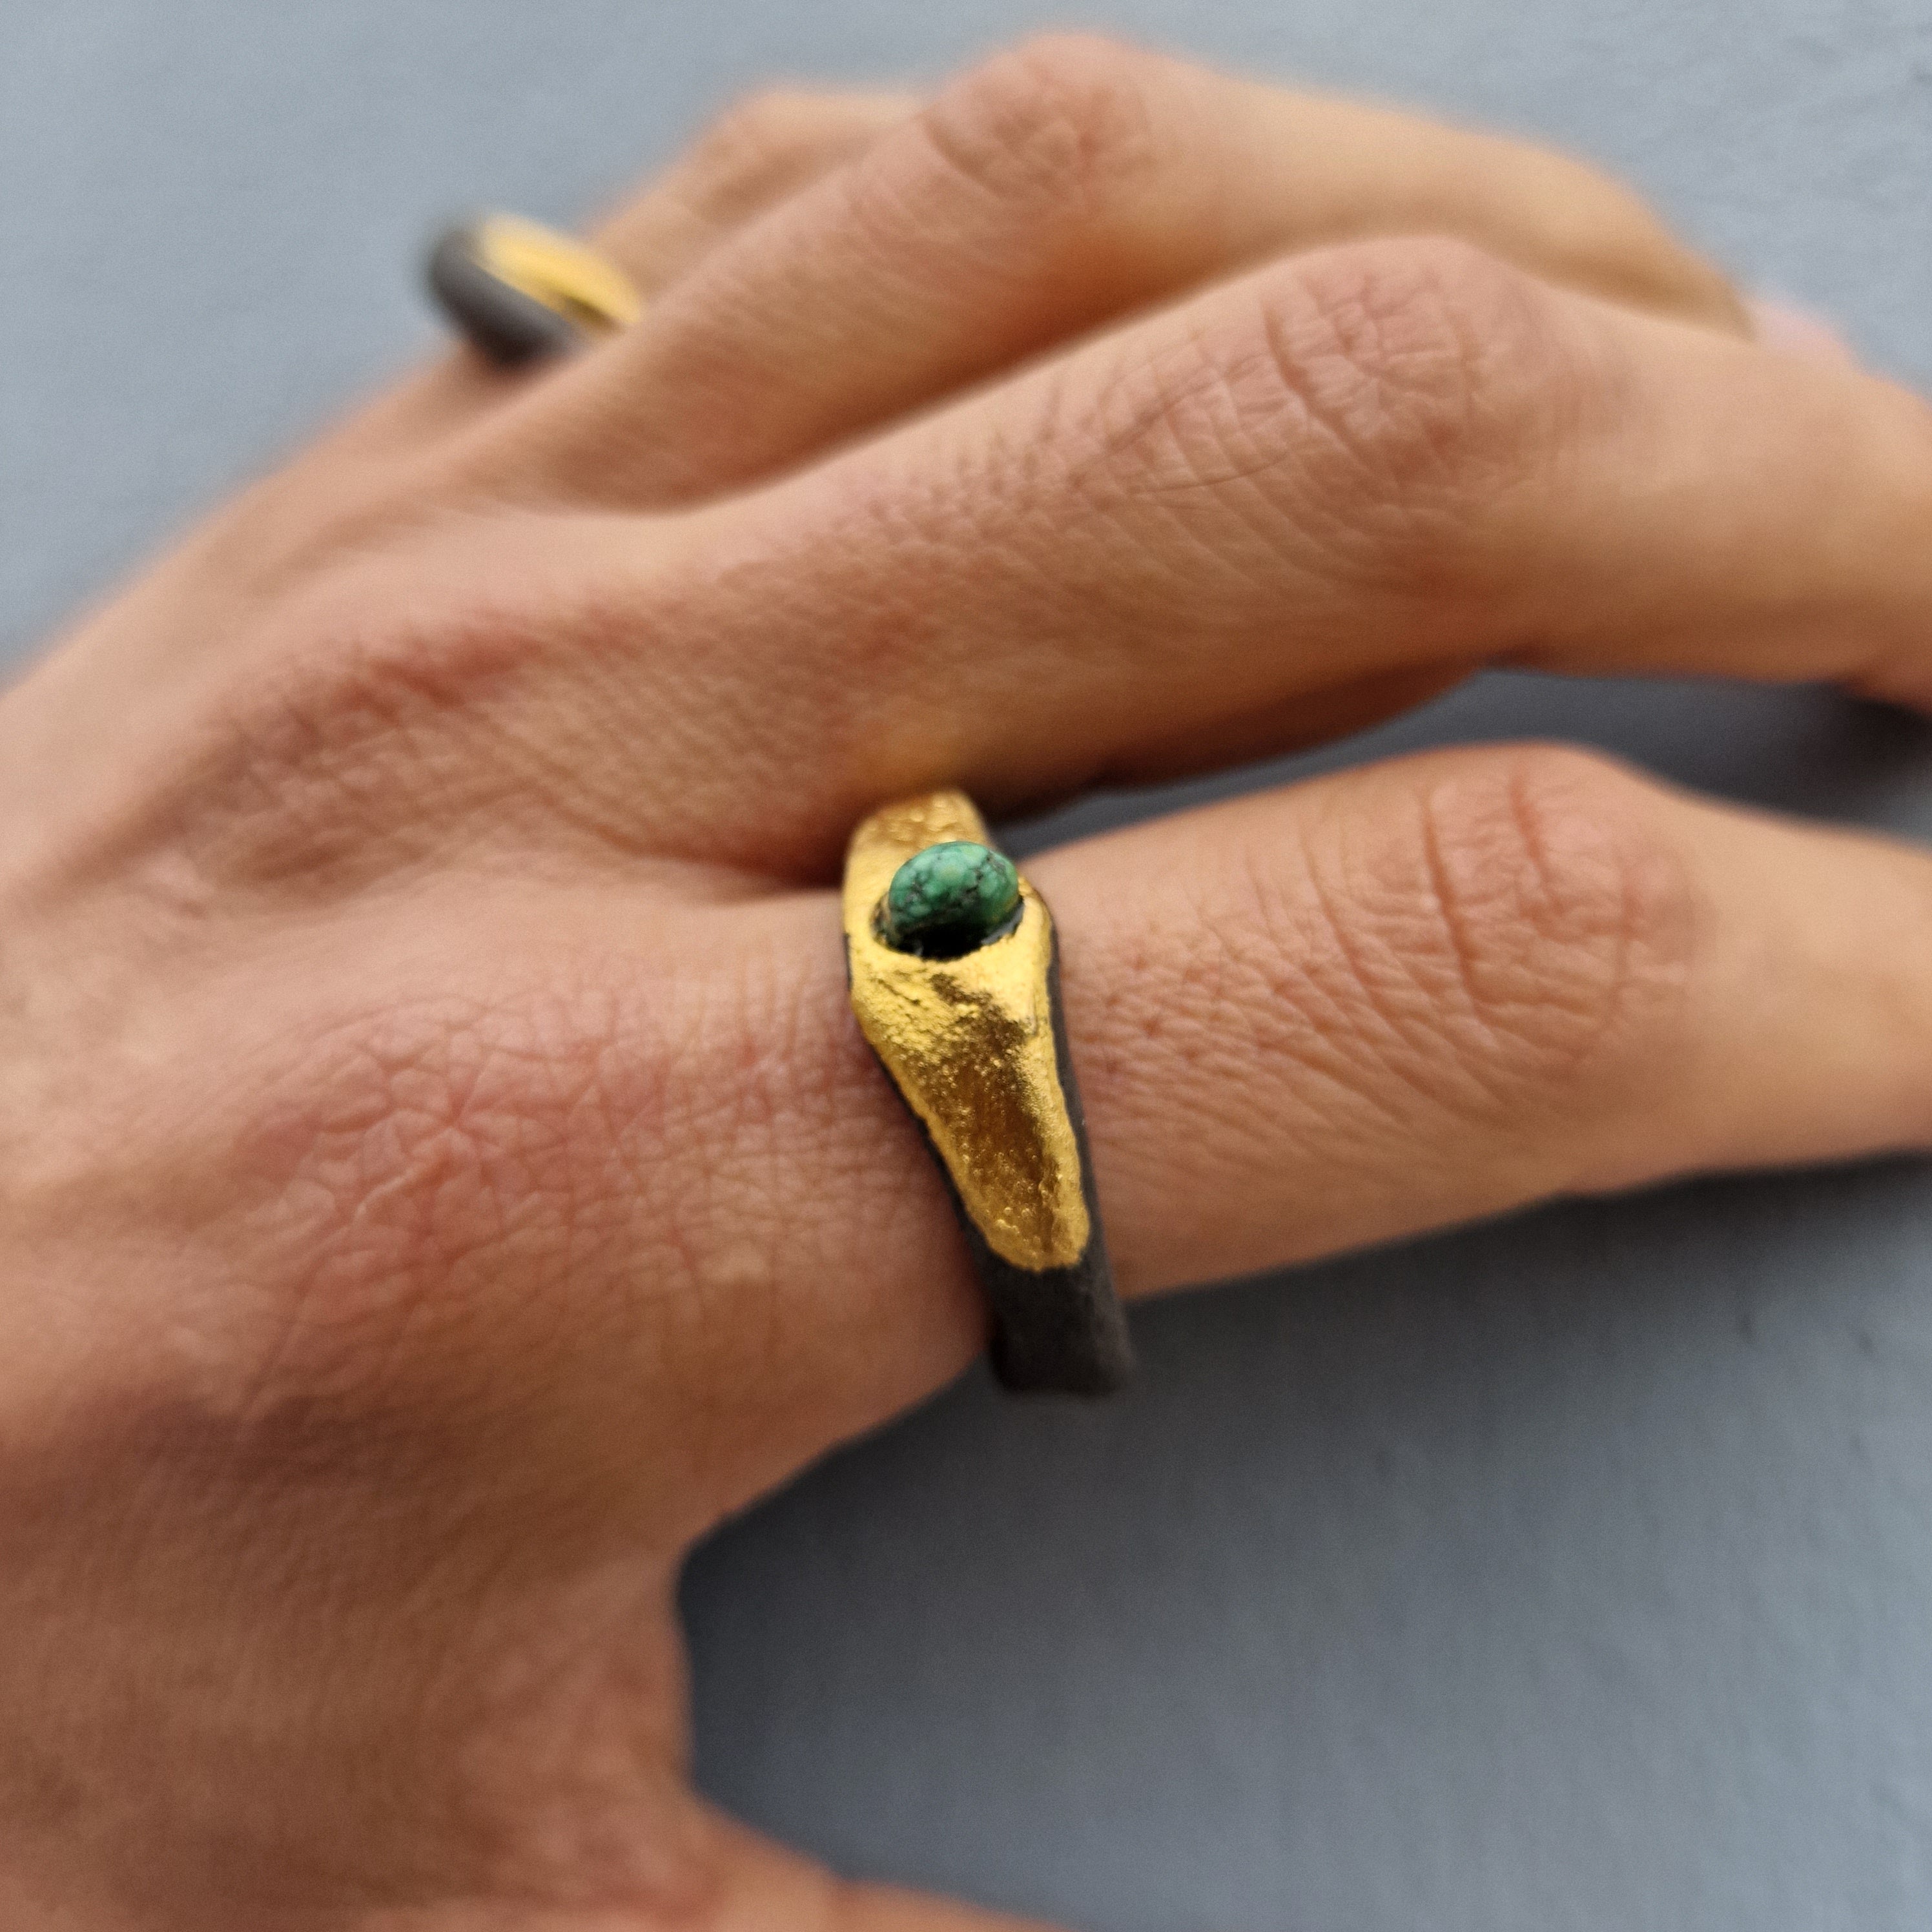 Handcrafted Ceramic Black Ring | Gold Plated Ring | Unique Ceramic Ring | Handmade Artisan Clay Ring Coated Gold inlaid turquoise Stone